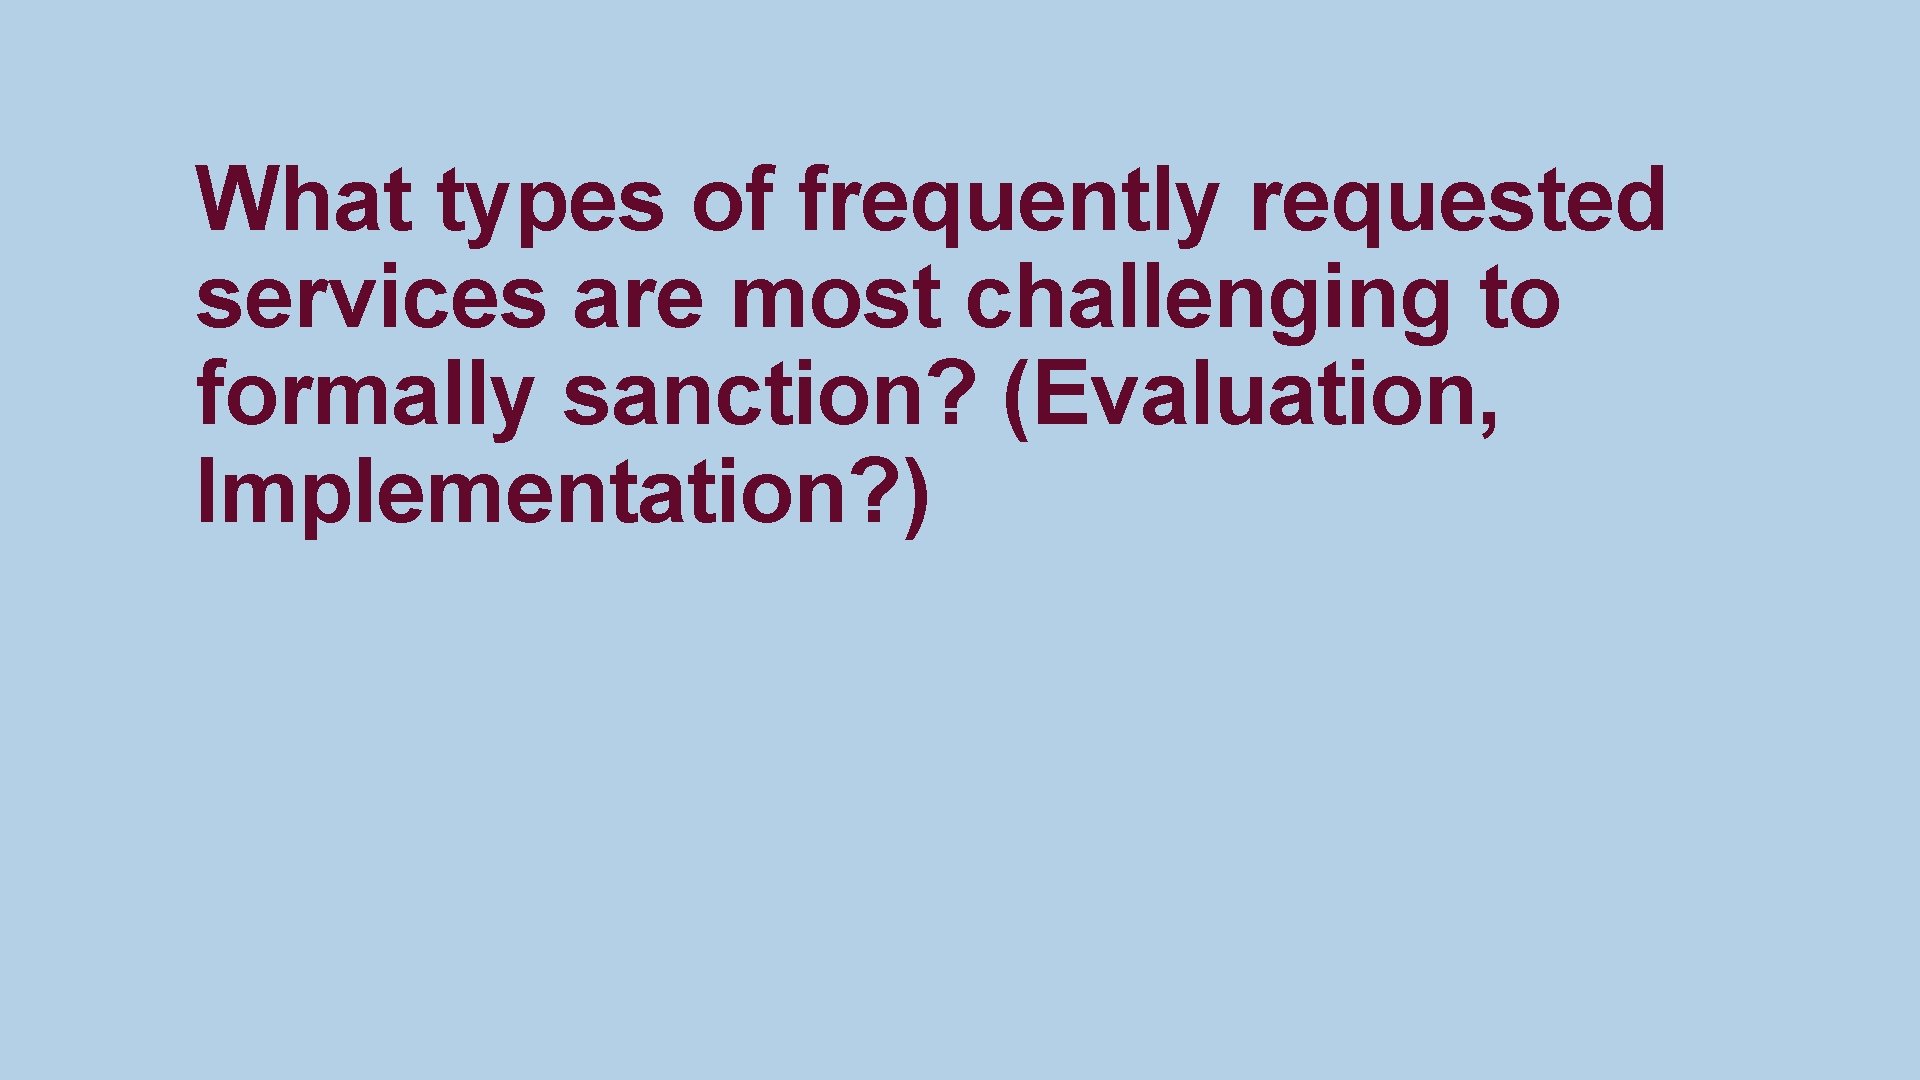 What types of frequently requested services are most challenging to formally sanction? (Evaluation, Implementation?